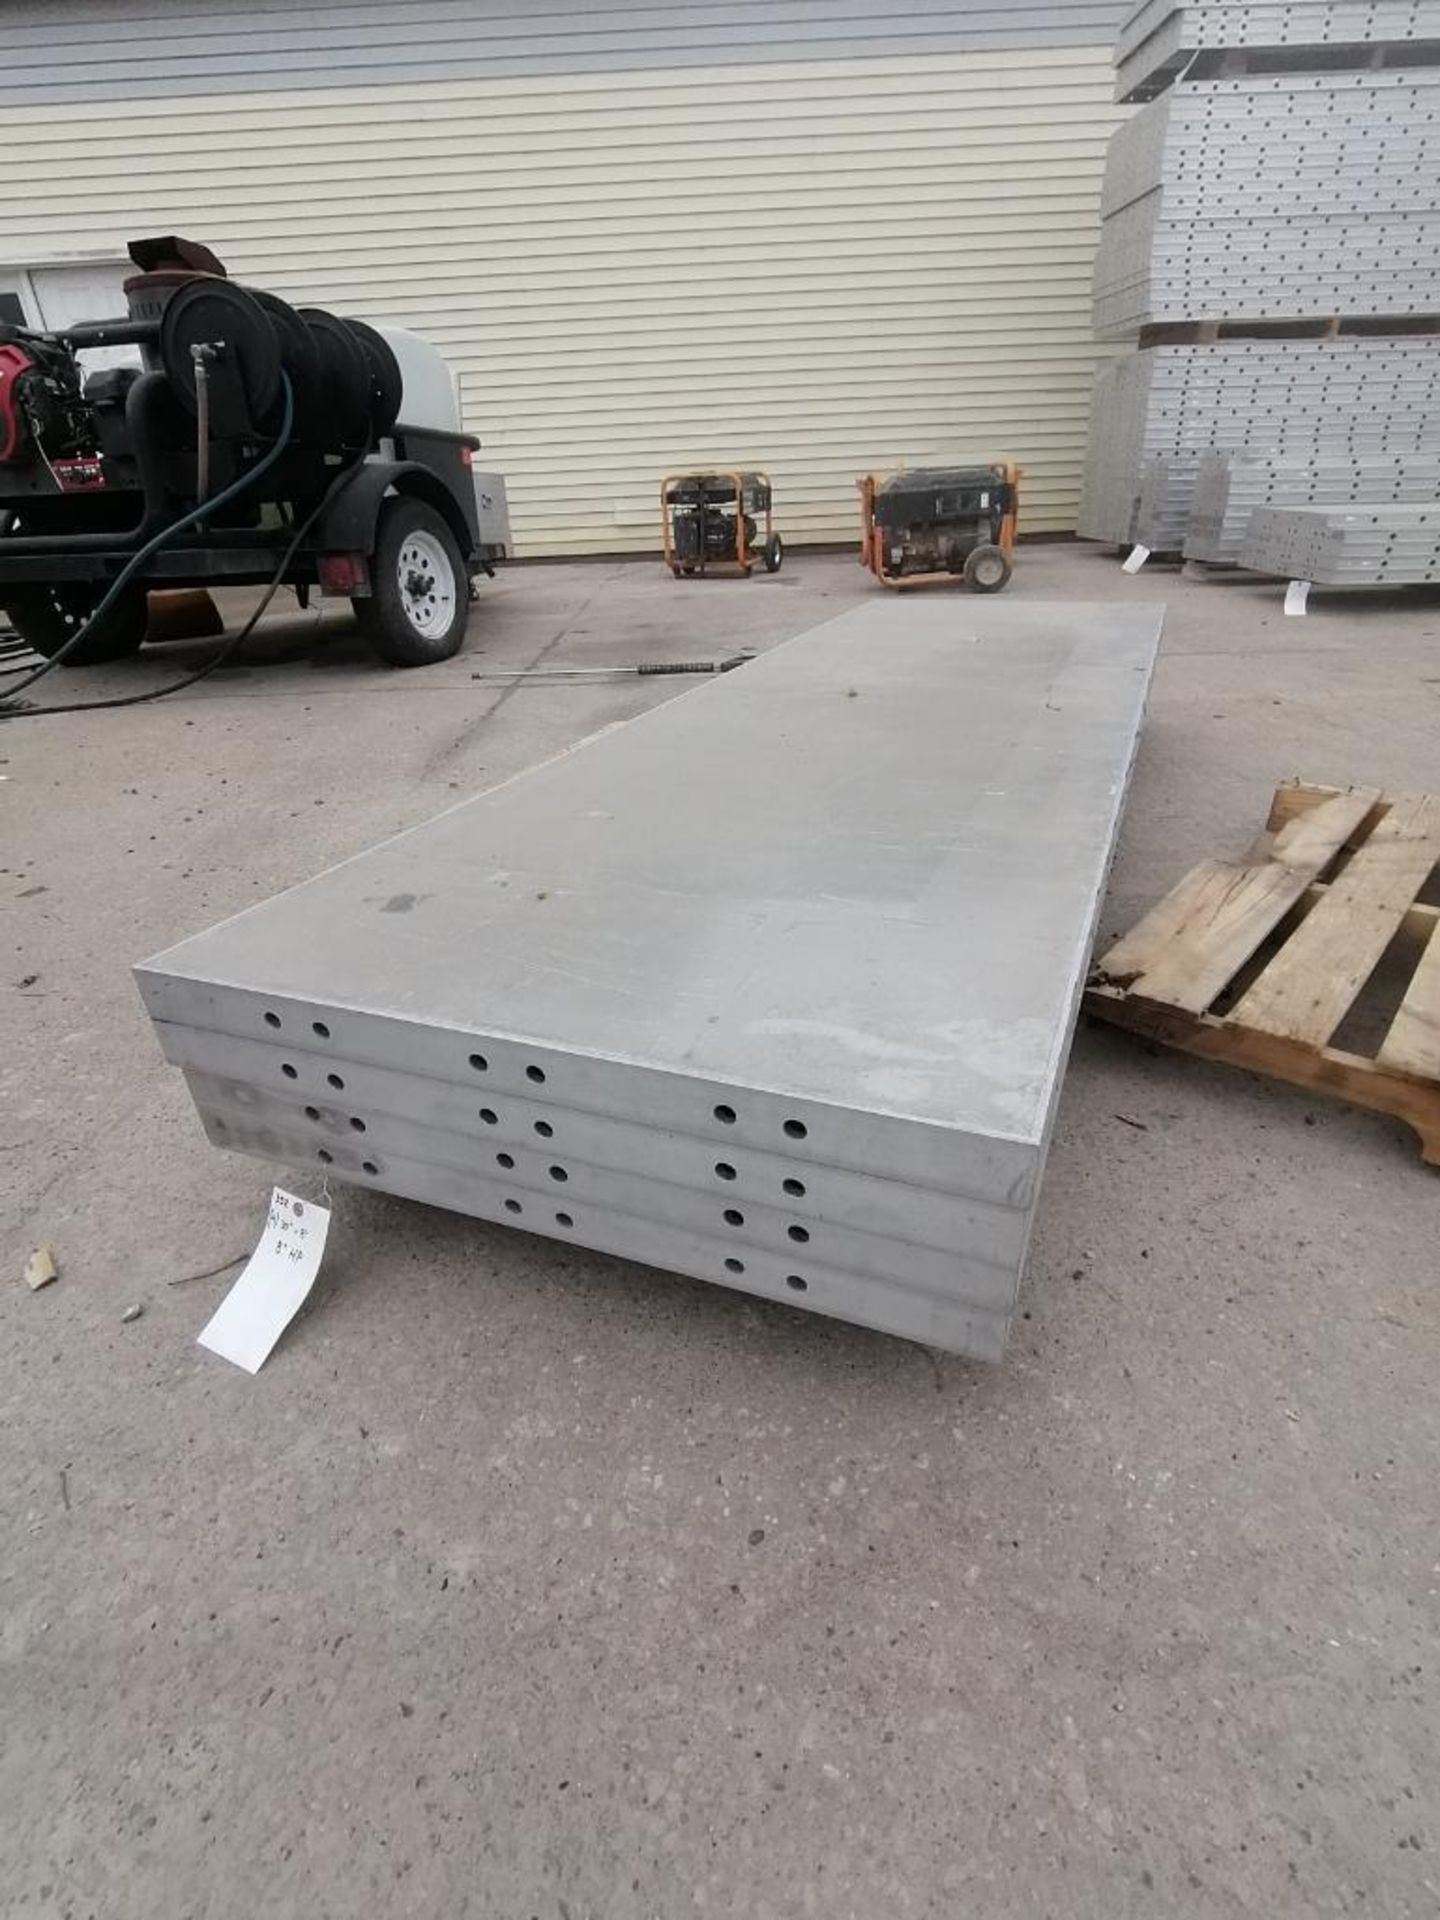 (4) 30" X 8' NEW Badger Smooth Aluminum Concrete Forms 8" Hole Pattern. Located in Mt. Pleasant,